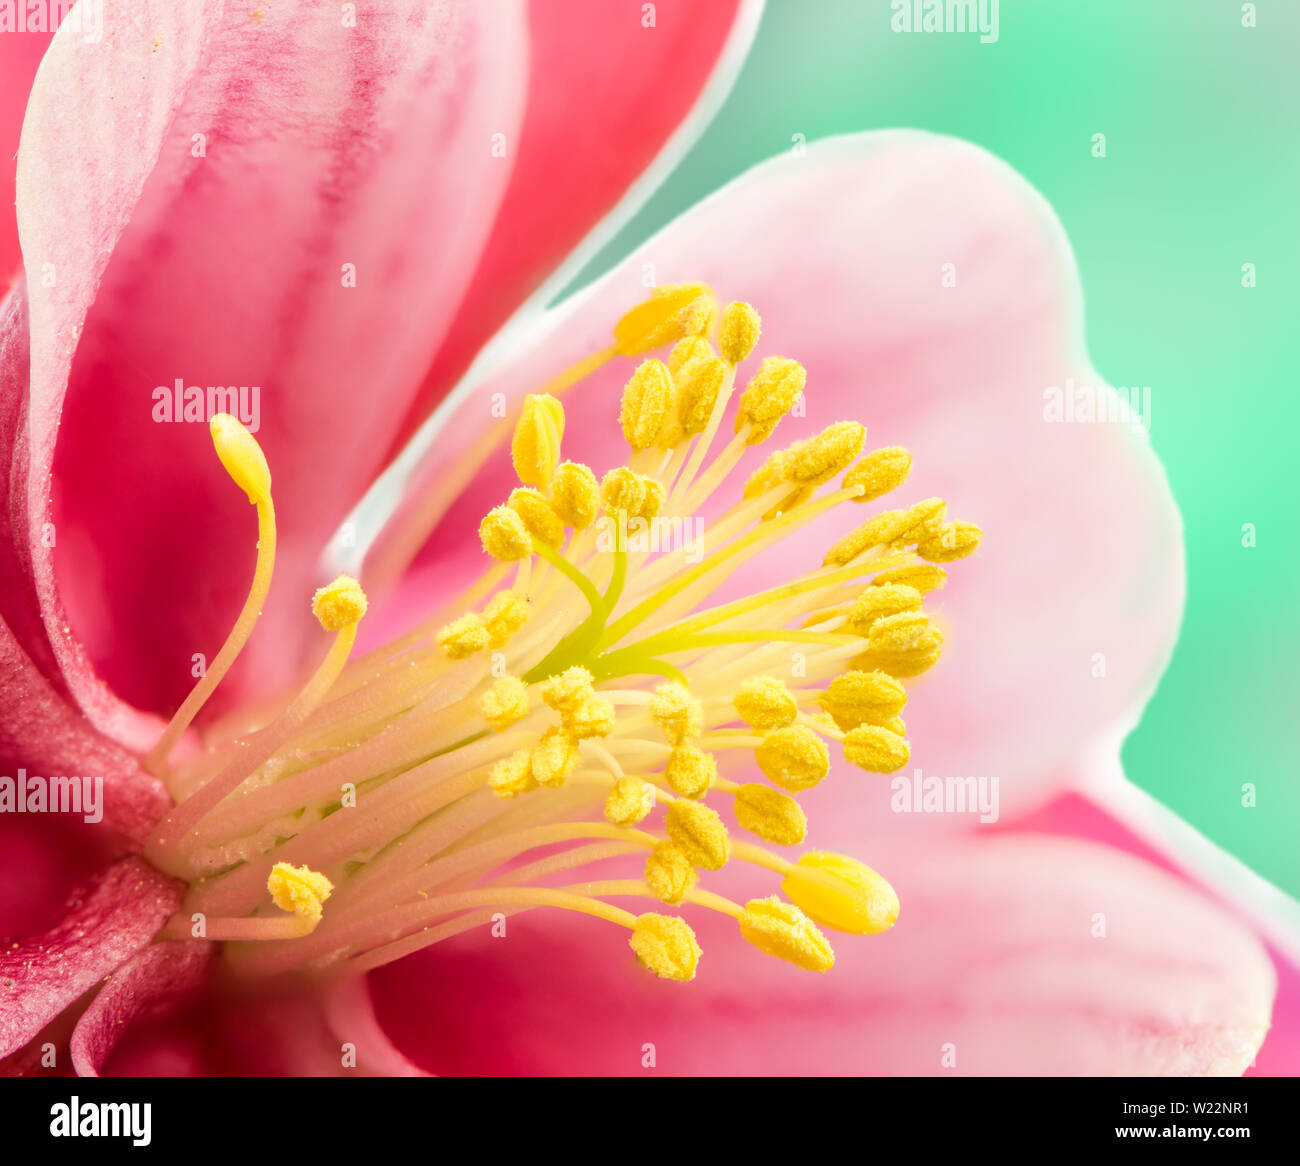 Anther of blossom from Columbine (Aquilegia) flower Stock Photo